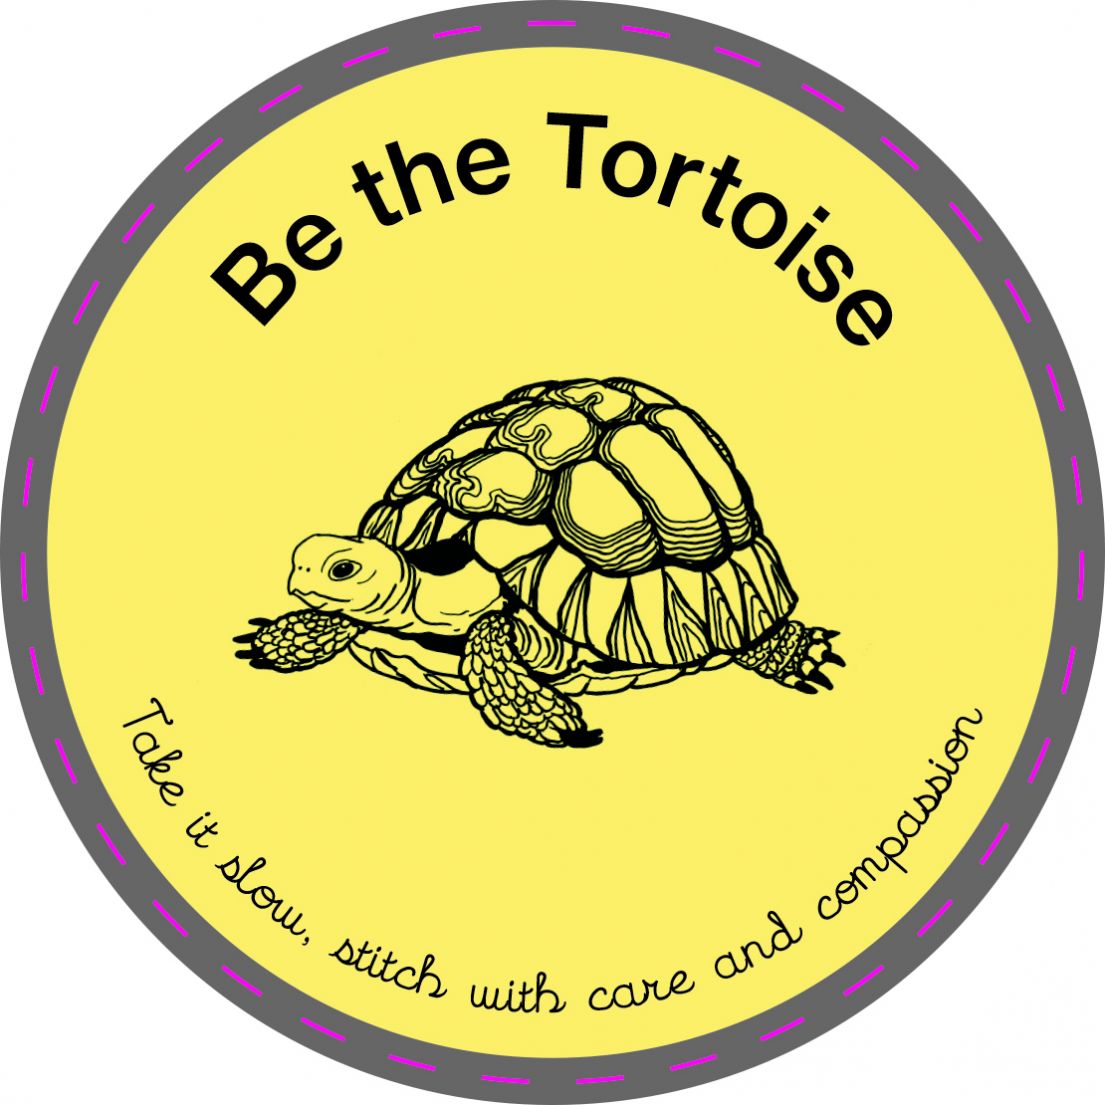 A round drinks coaster template with a Tortoise in the centre. Around this reads 'Be the Tortoise' 'Take is slow, stitch with care and compassion.